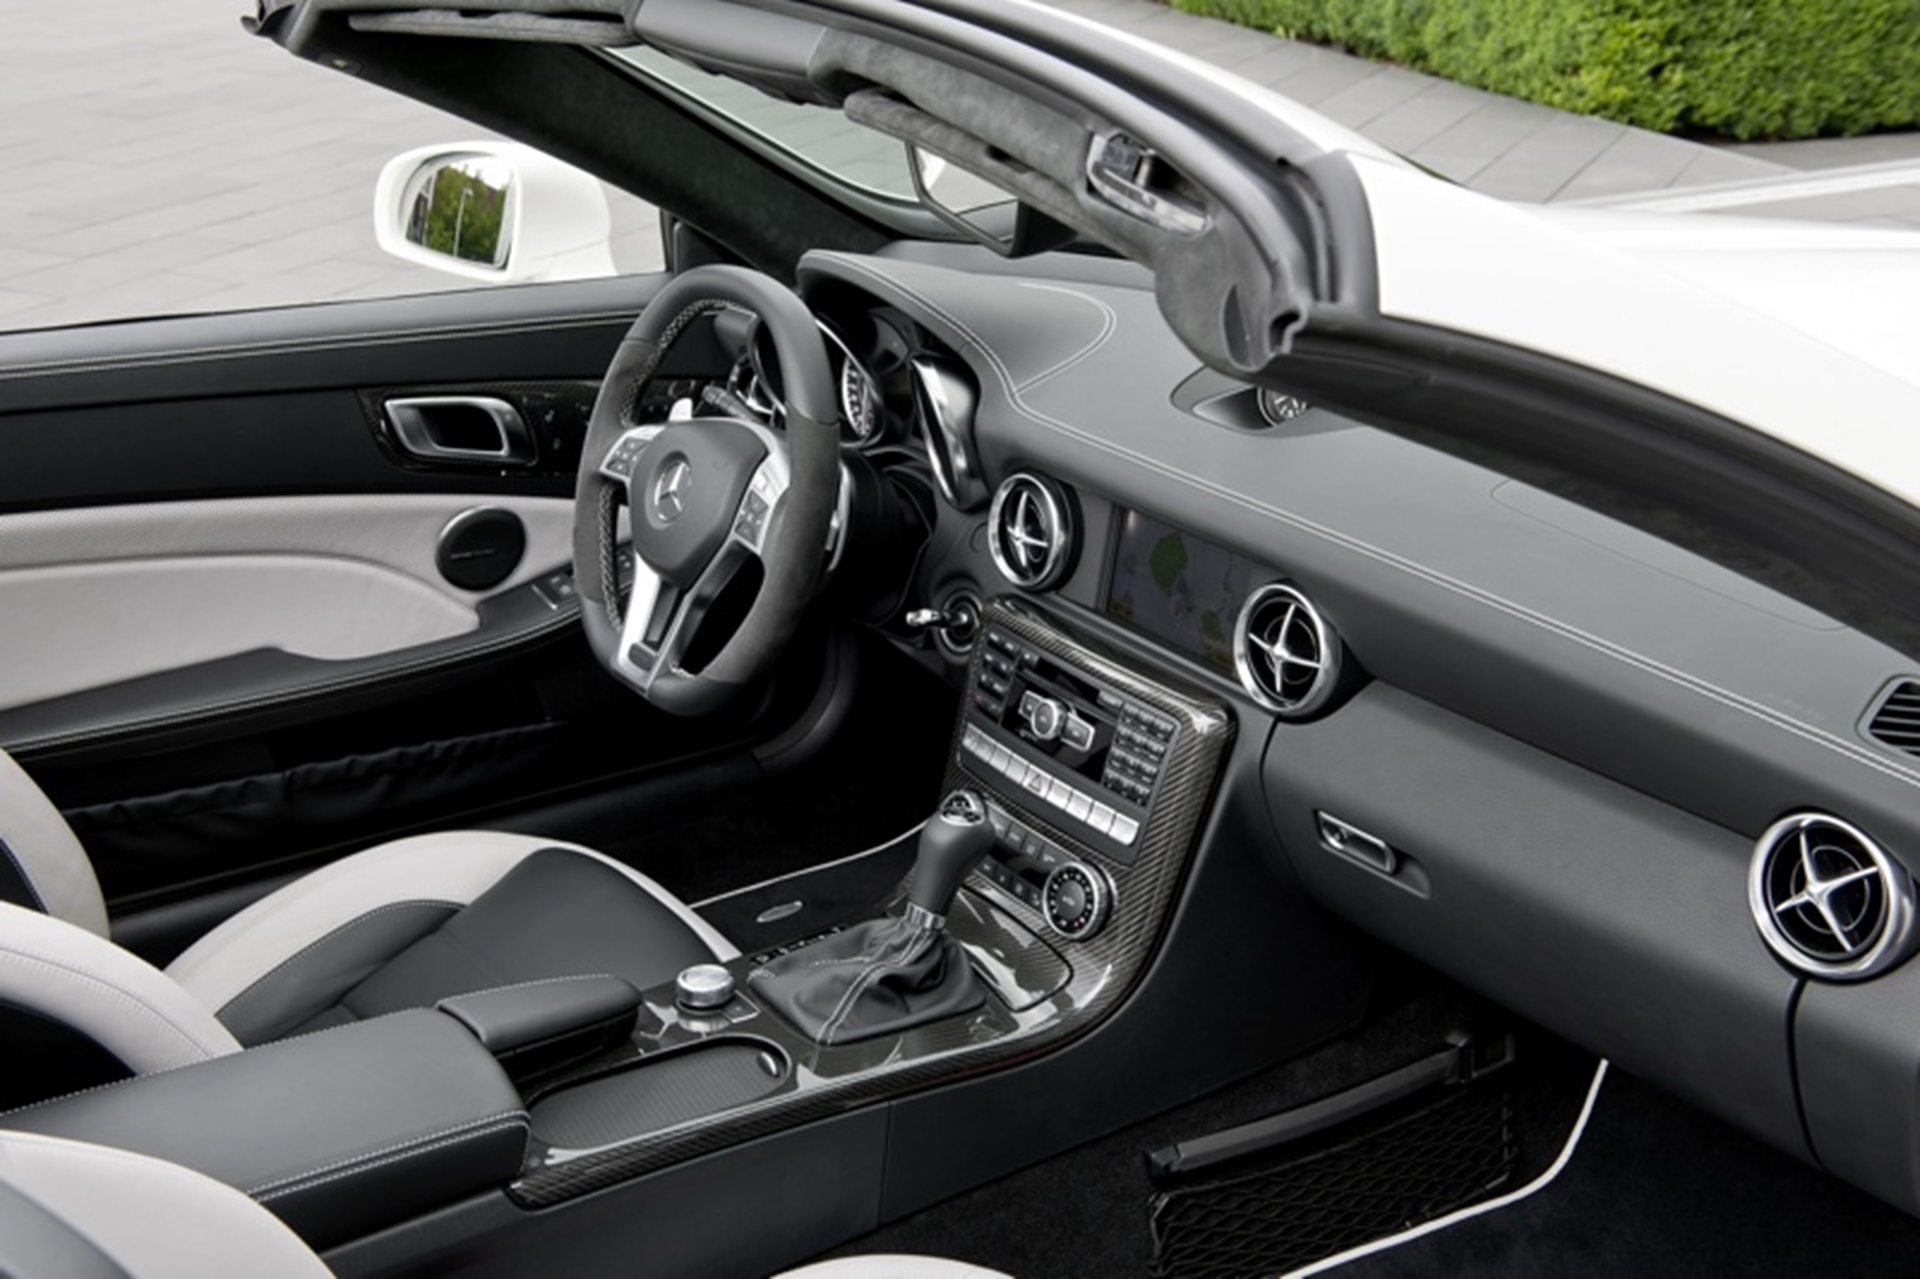 Mercedes-Benz Most powerful SLK of all time